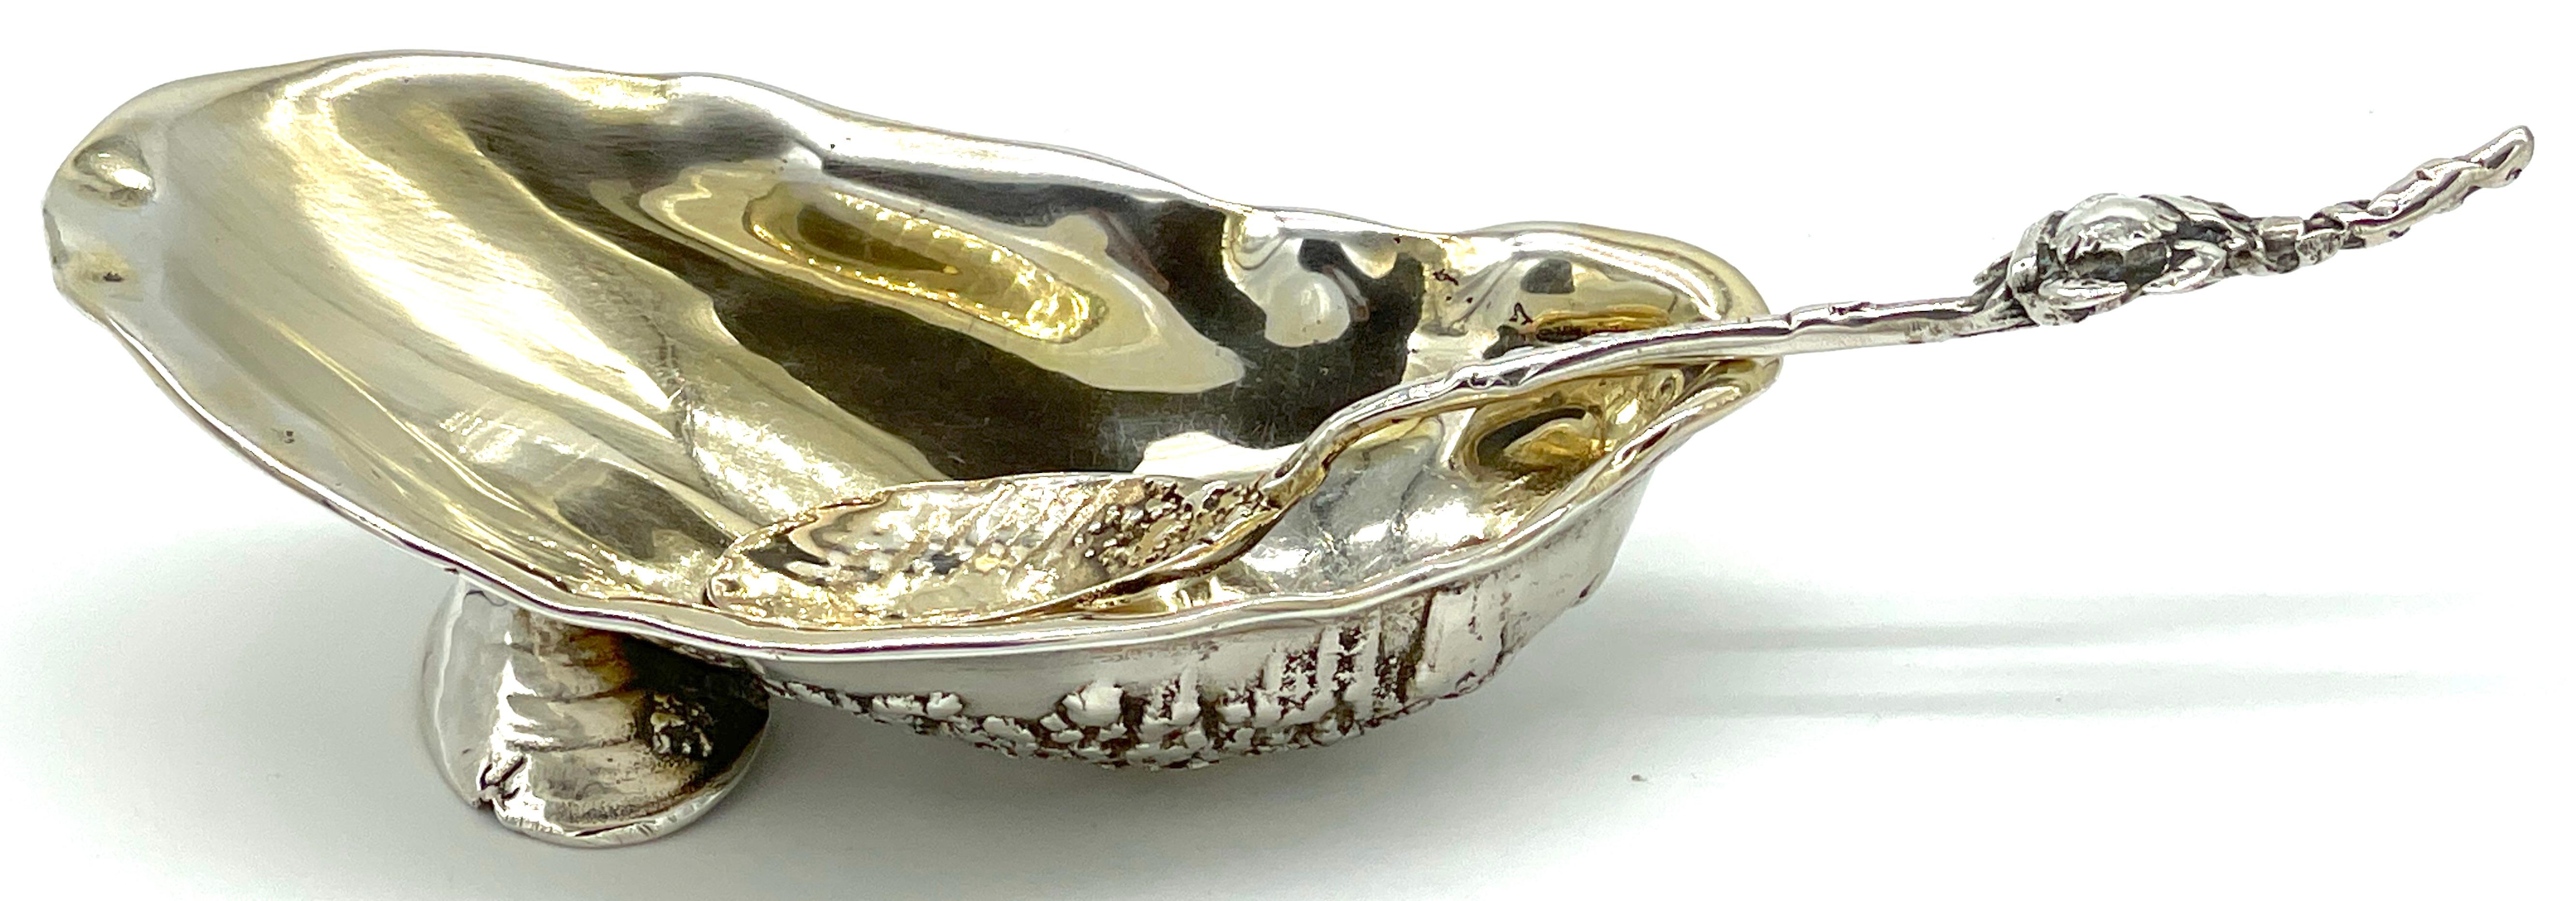 Gorham 'Narragansett' Gold Washed Sterling Shell Dish & Figural Crab Spoon  For Sale 9